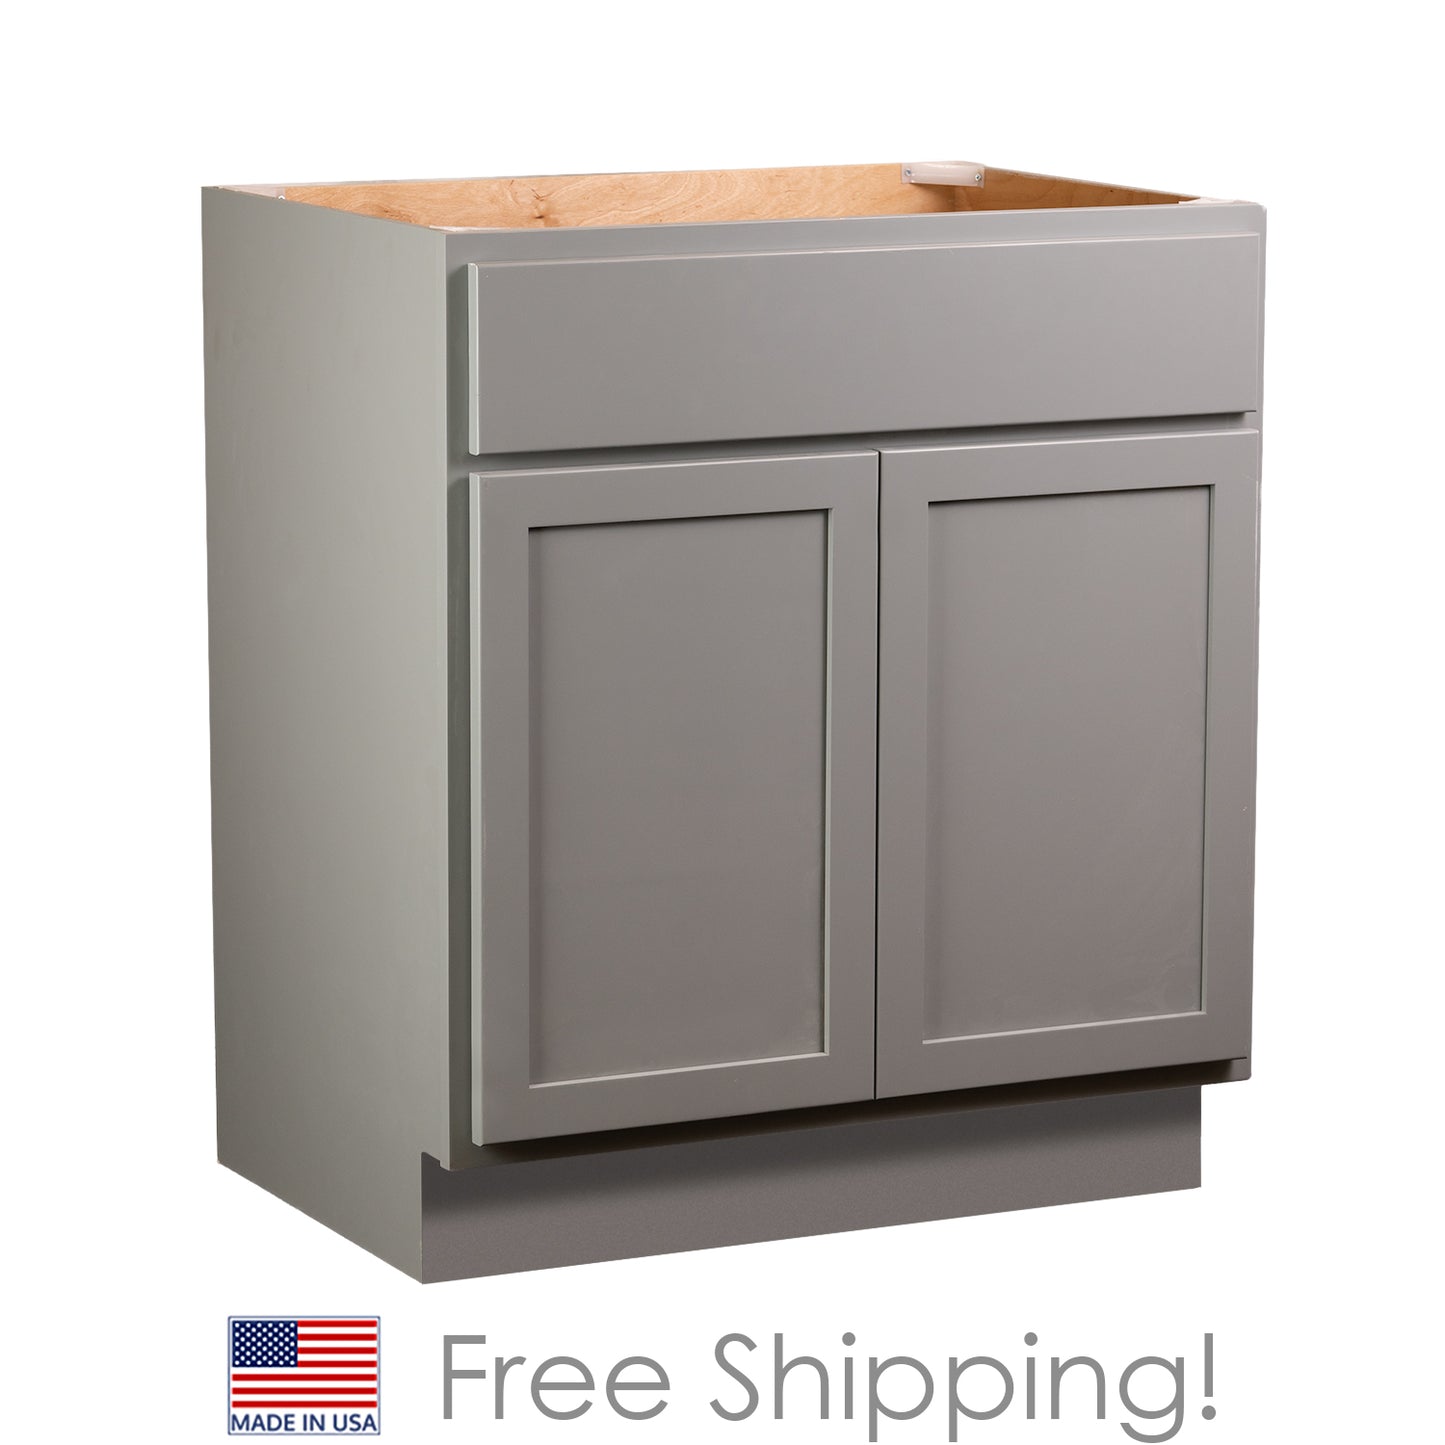 Quicklock RTA (Ready-to-Assemble) Magnetic Grey Vanity Base Cabinet | 36"Wx34.5"Hx18"D